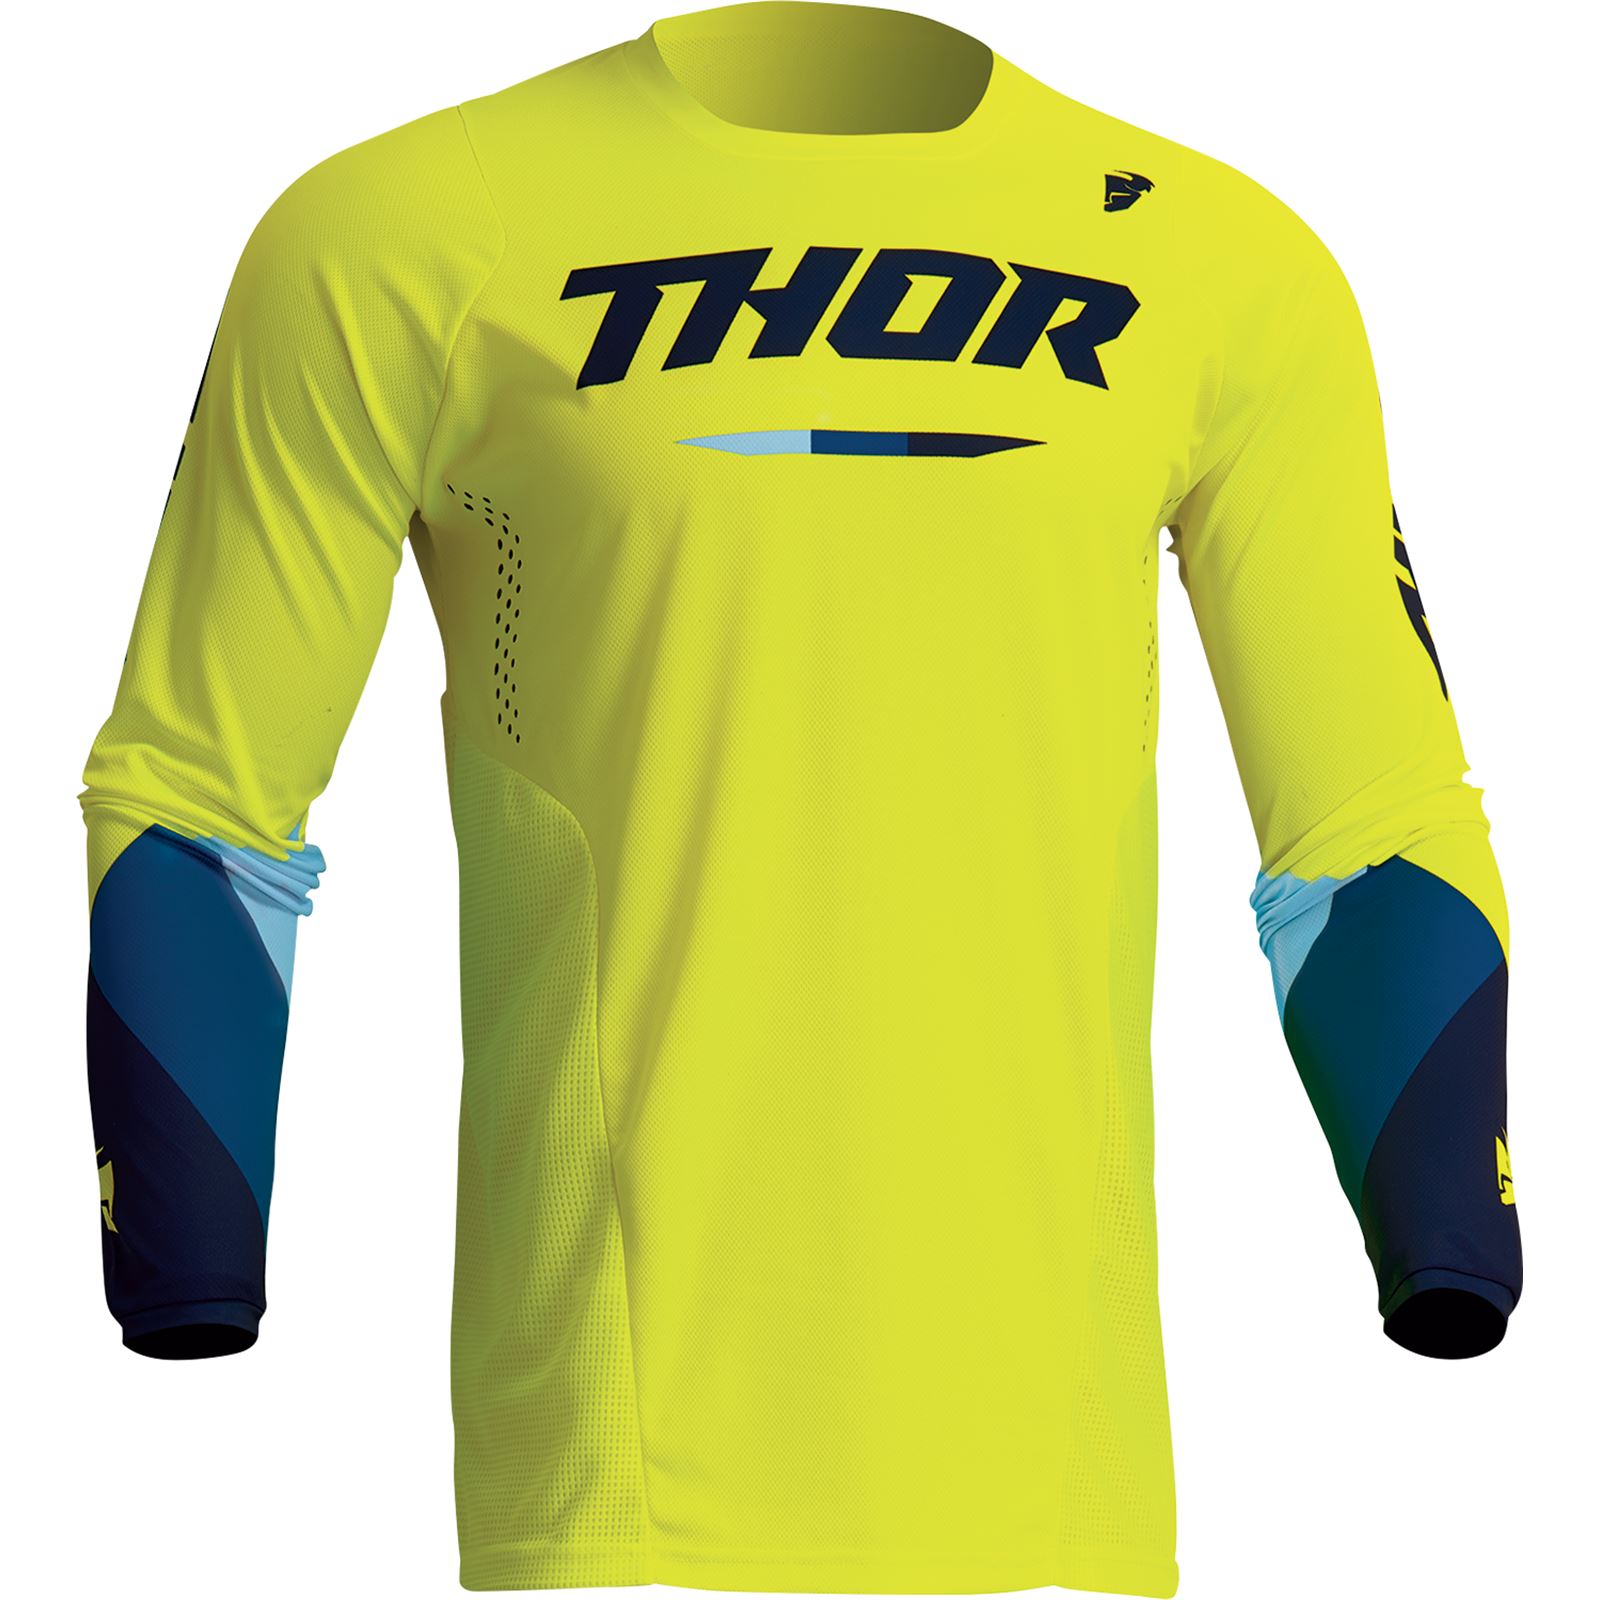 Thor Pulse Tactic Jersey - Acid - Small